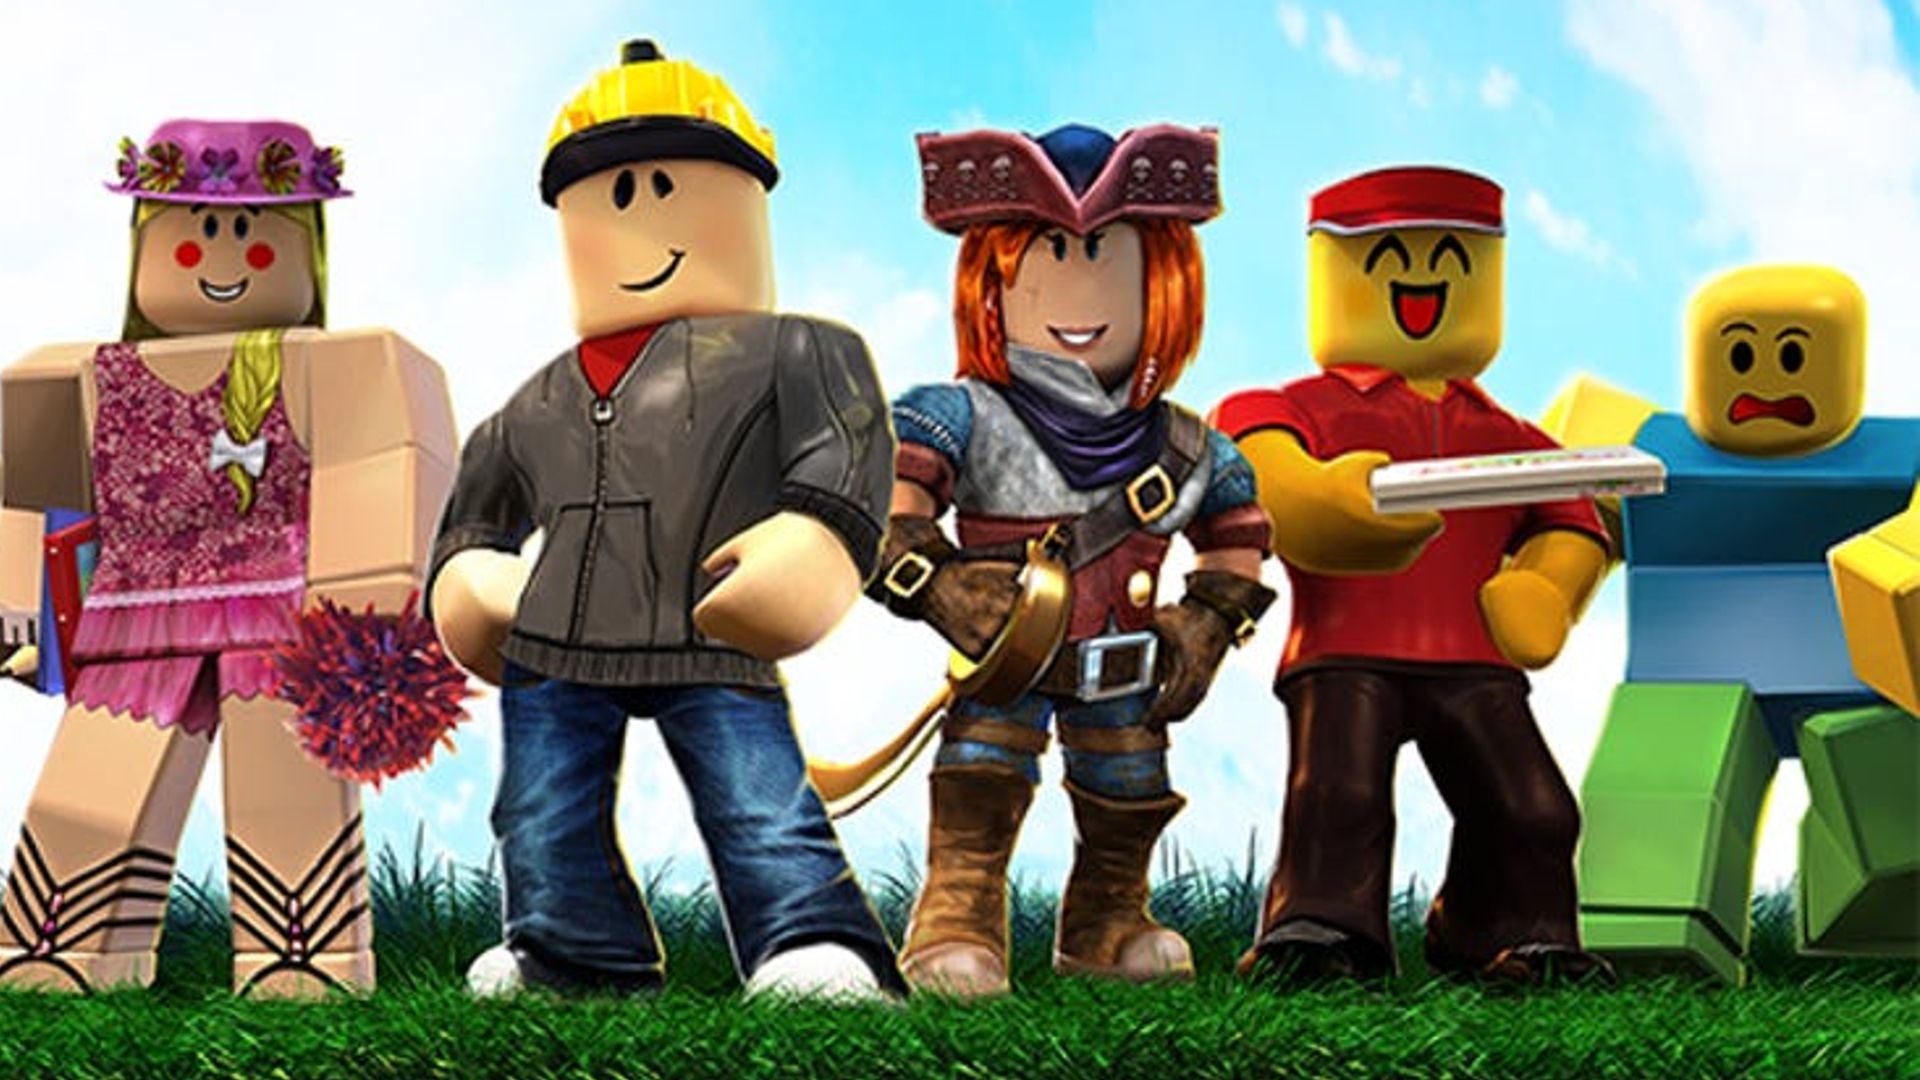 Roblox: Multiple people can be seen